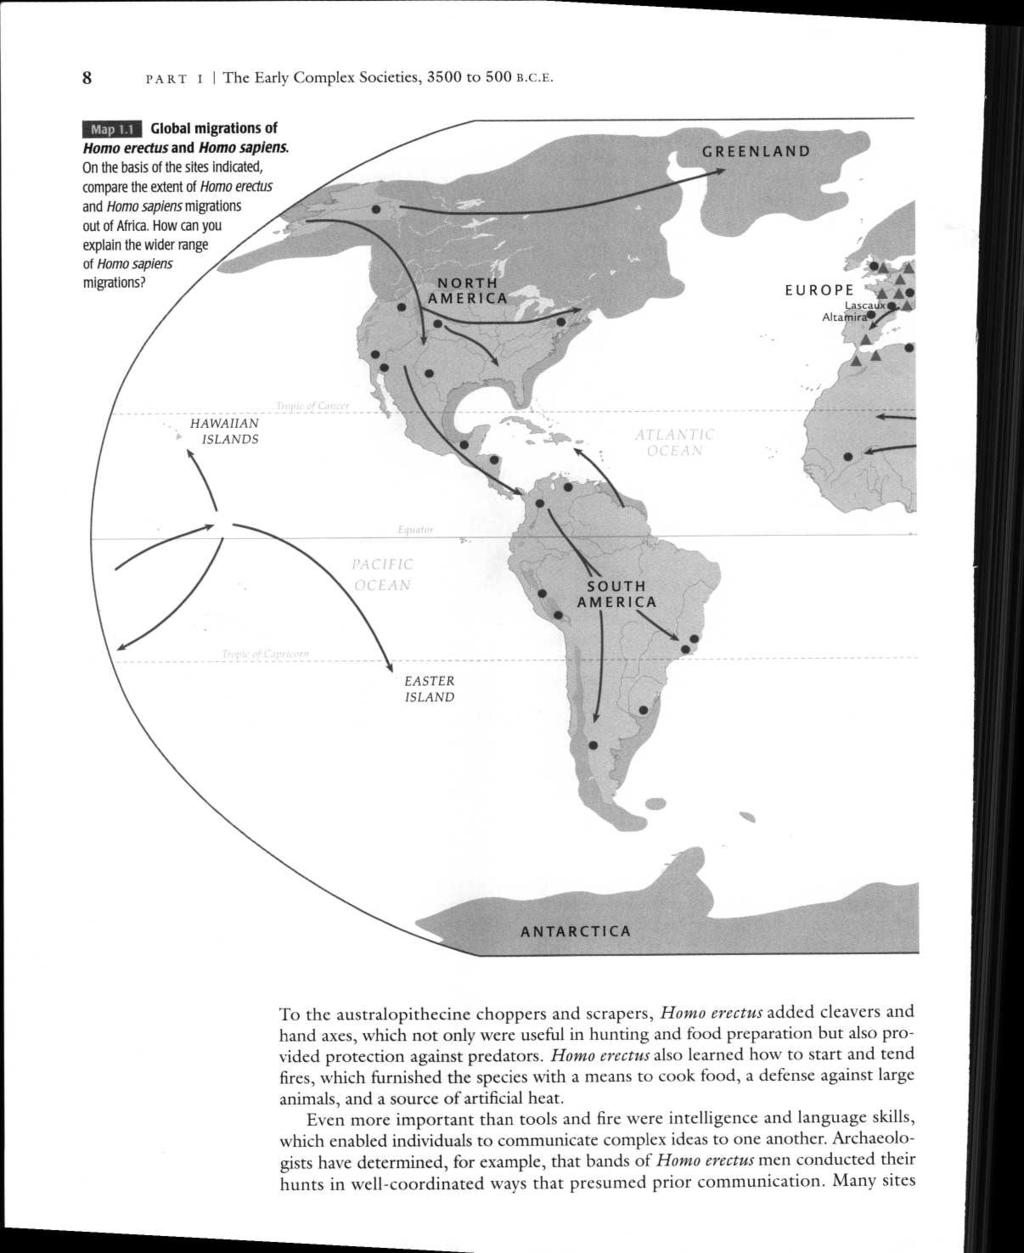 8 PART t I The Early Complex Societies, 3500 to 500 B.C.E. Map 1.1 Global migrations of Homo erectus and Homo sapiens.